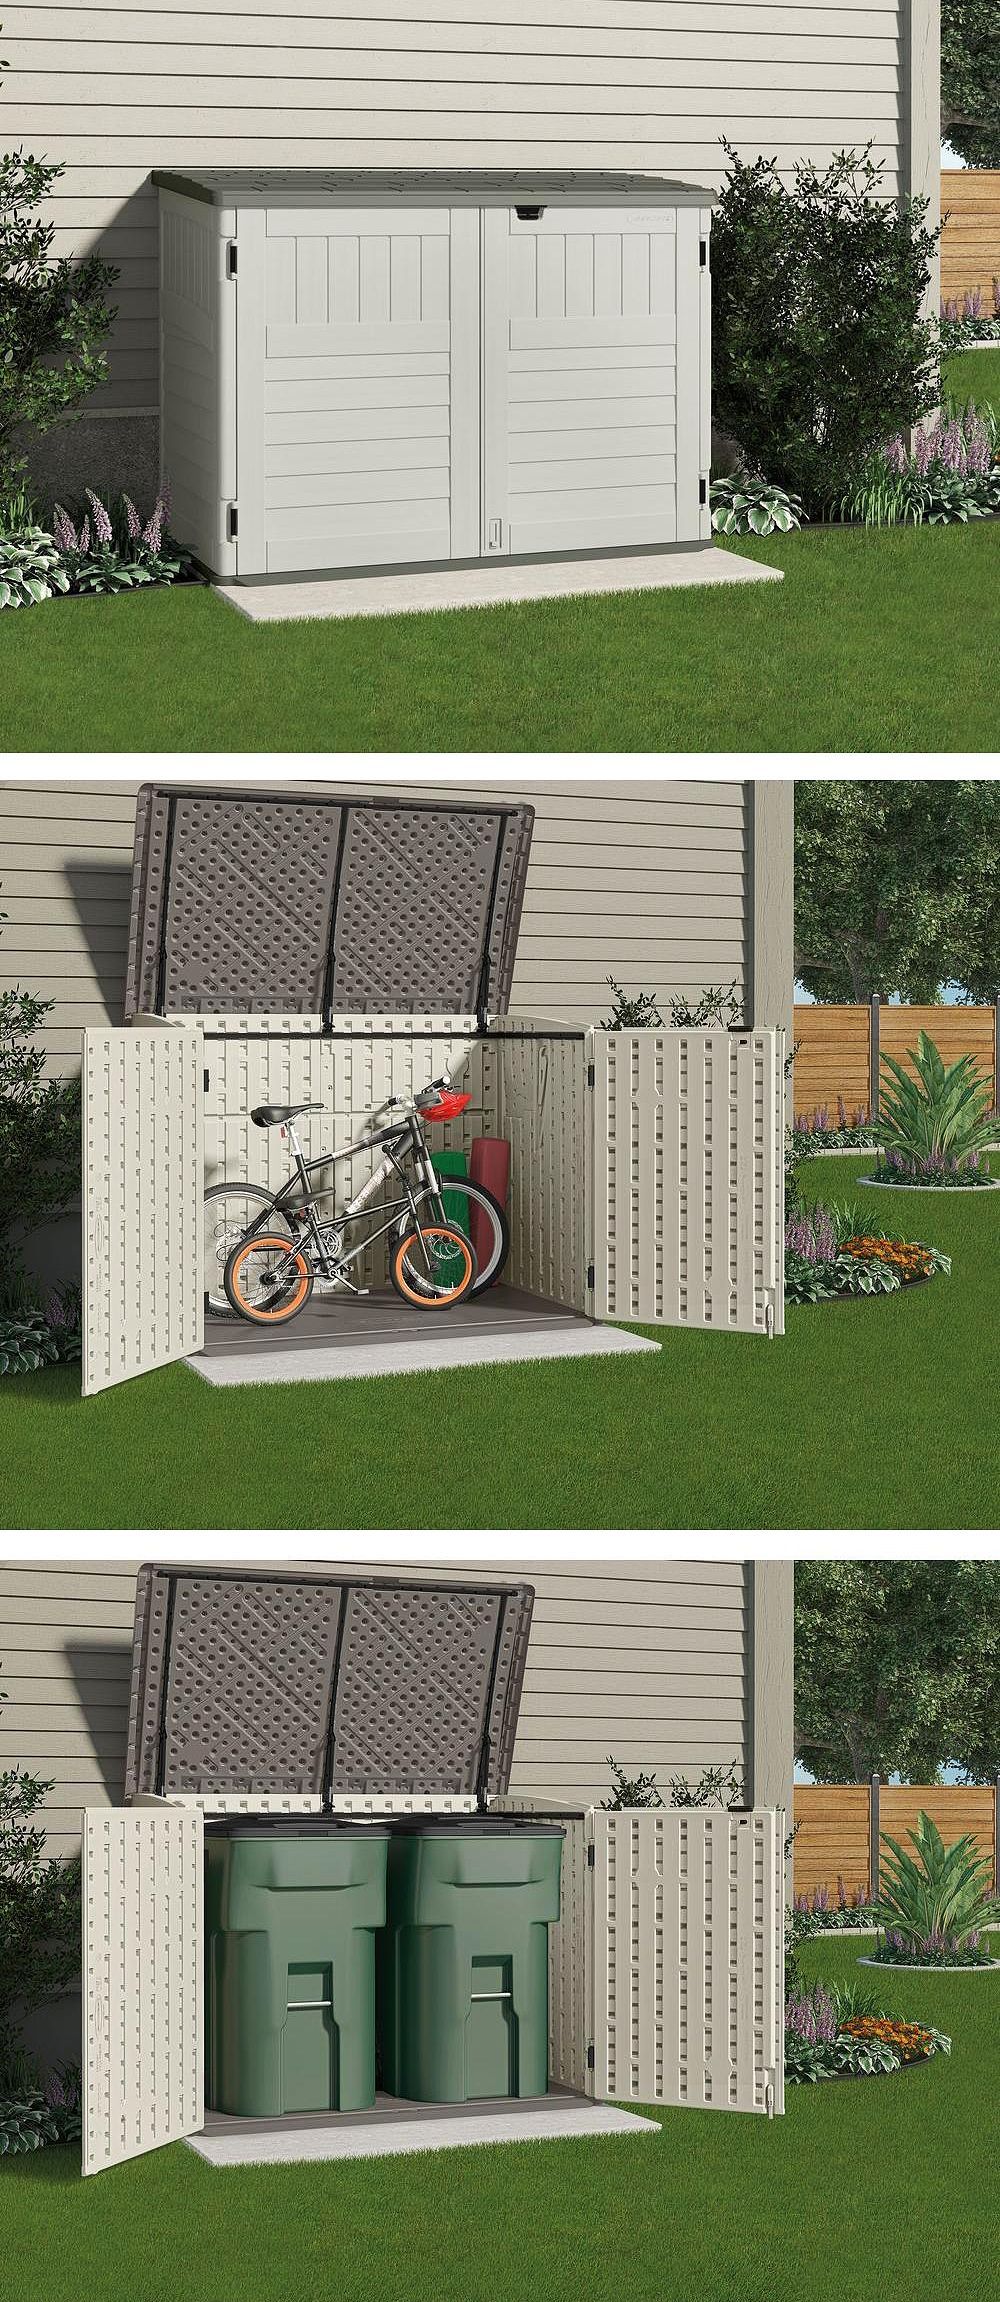 This small storage shed is just the right size to store your bicycles safely or to hide garbage cans. It won’t take up a lot of